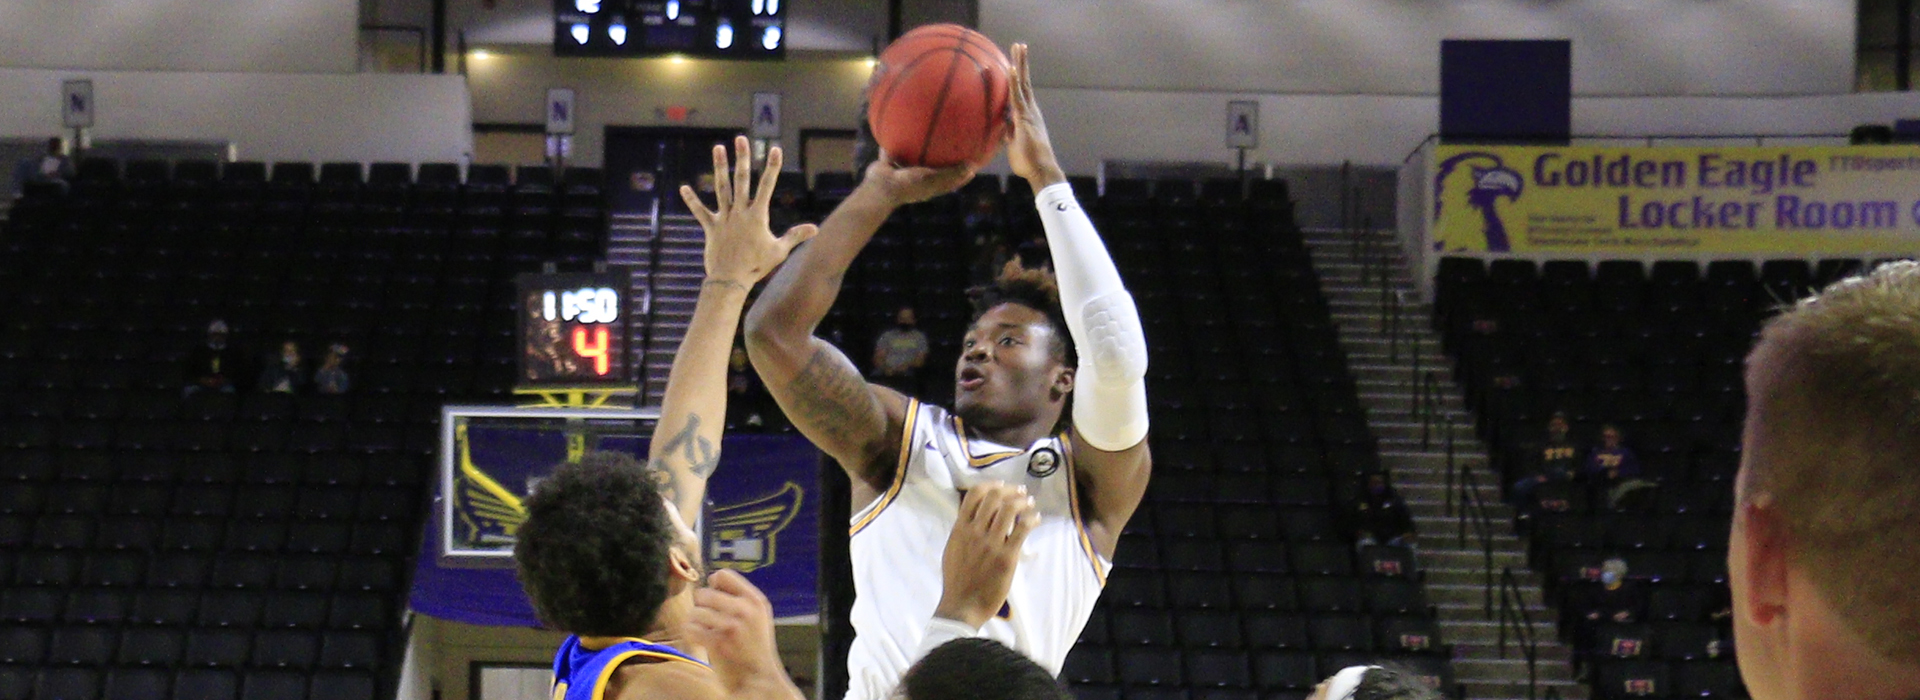 Golden Eagles fall to streaking Morehead State in Eblen Center match-up